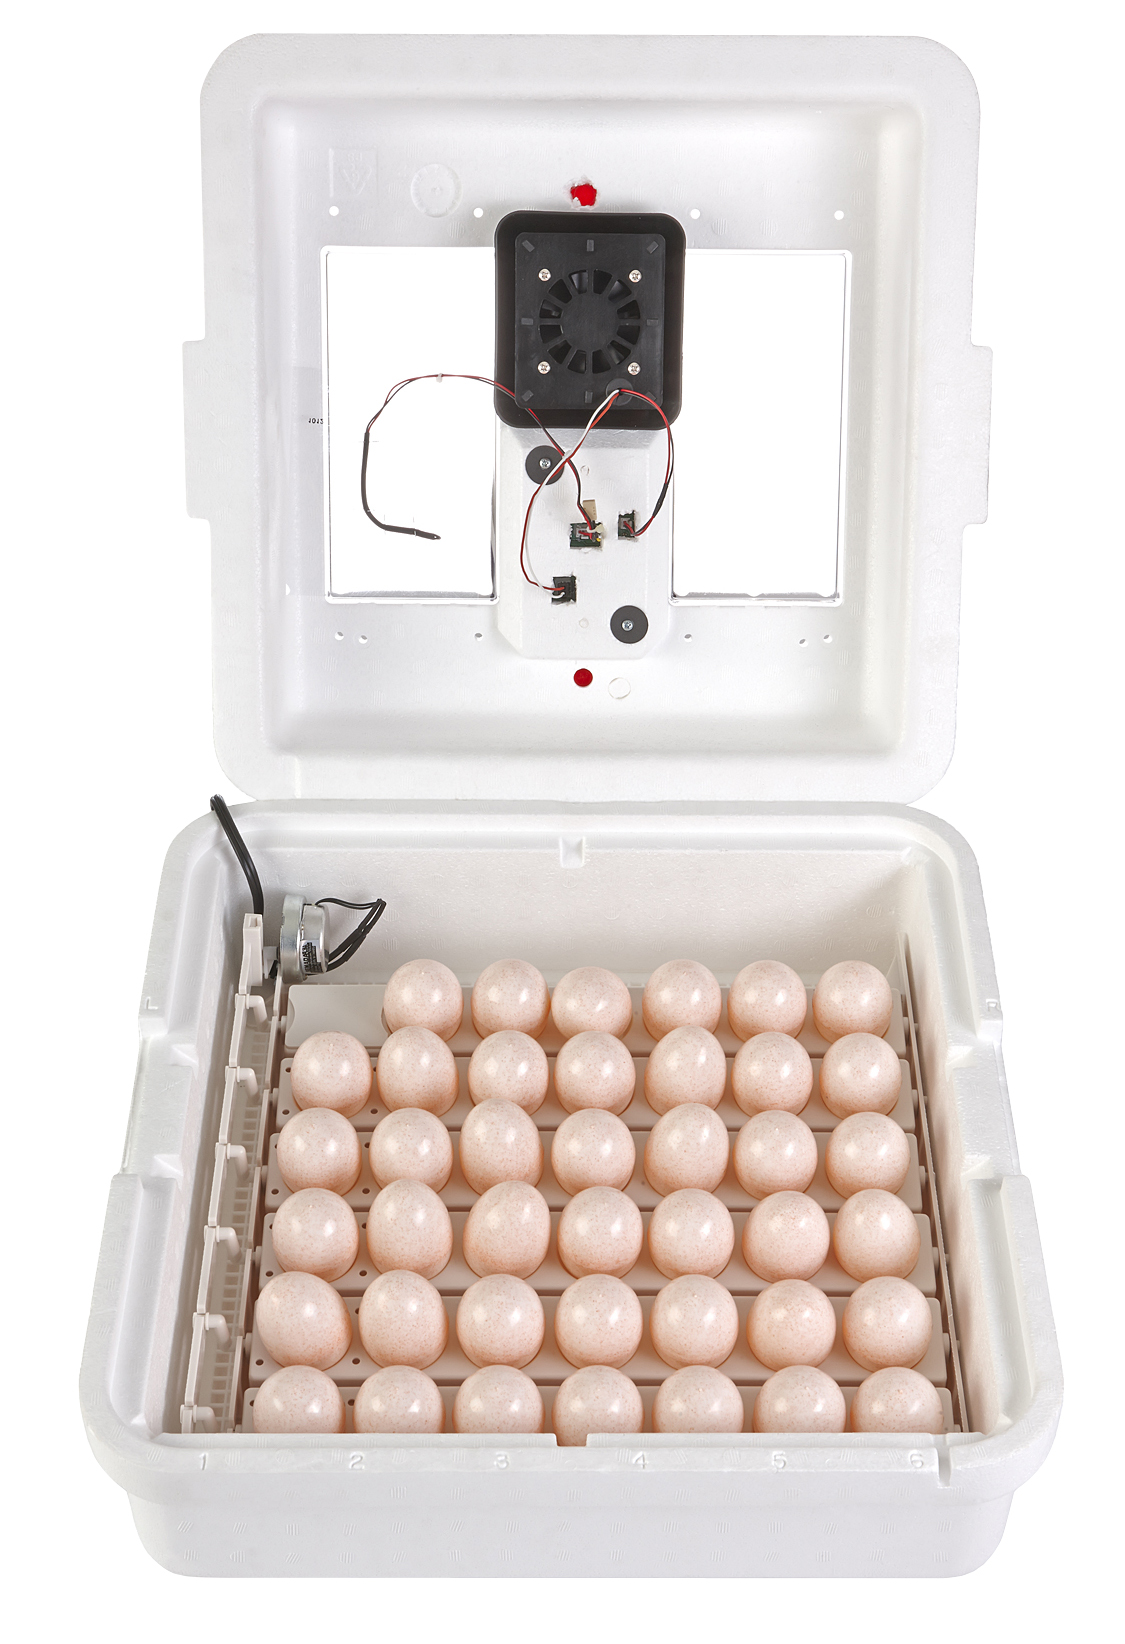 Little Giant 12300 CSA Poultry Incubator